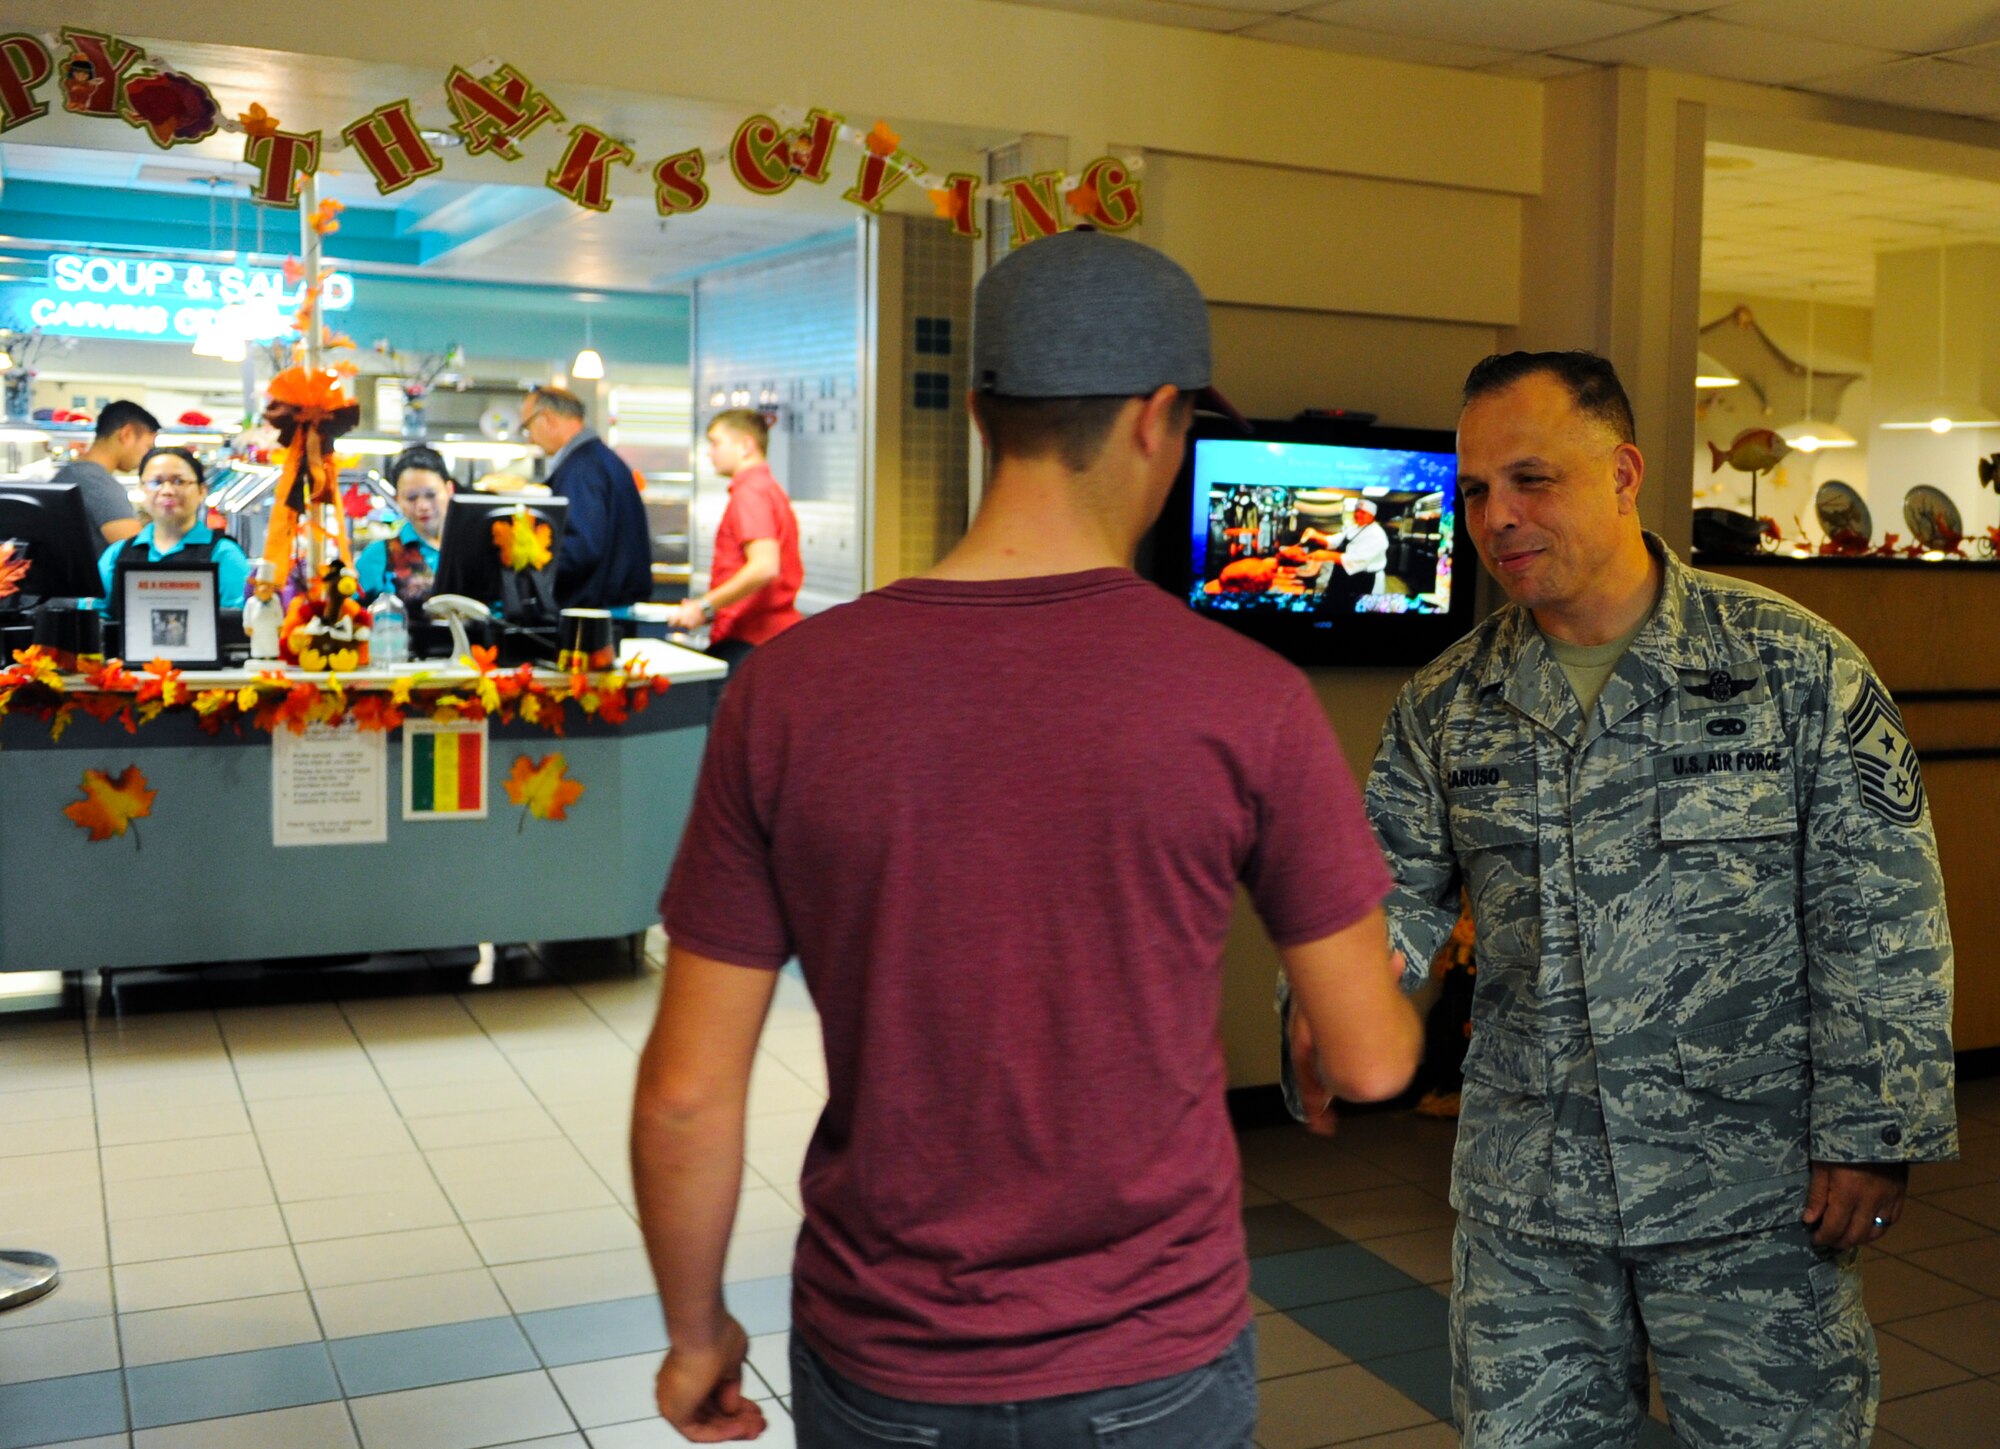 Chief Master Sgt. Matthew Caruso, Air Force Special Operations Command command chief, greets an Air Commando at the Reef Dining Facility during Thanksgiving lunch at Hurlburt Field, Fla., Nov. 27, 2014. Leadership from the Air Force Special Operations Command and 1st Special Operations Wing served Air Commandos and retirees during the lunch. (U.S. Air Force photo/Senior Airman Christopher Callaway)